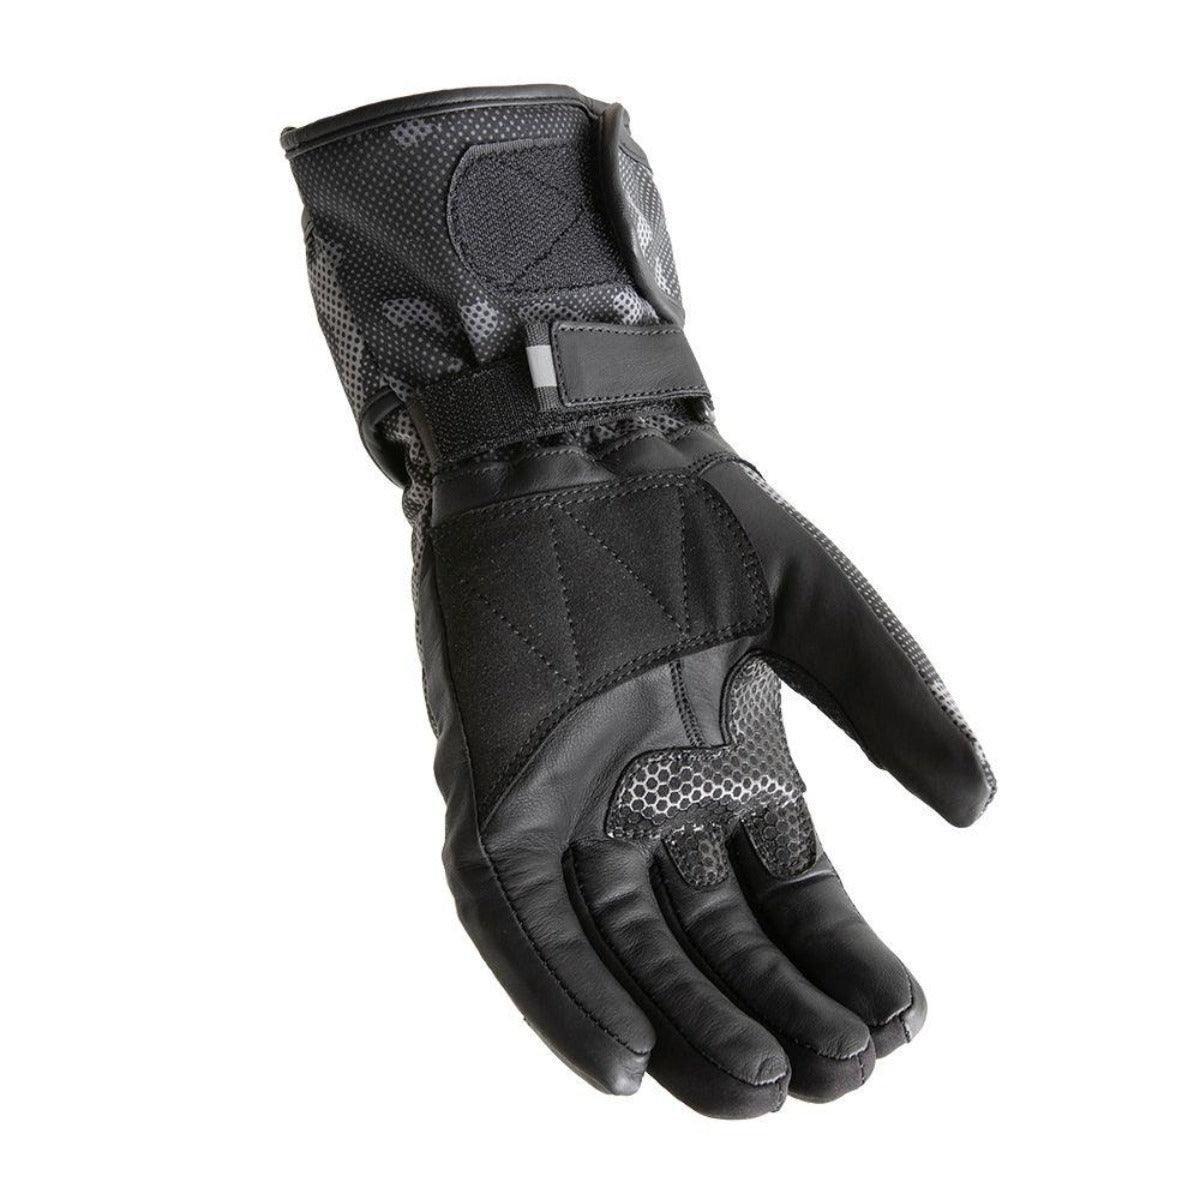 First Manufacturing After Burner - Men's Motorcycle Heated Gloves, Gray - American Legend Rider